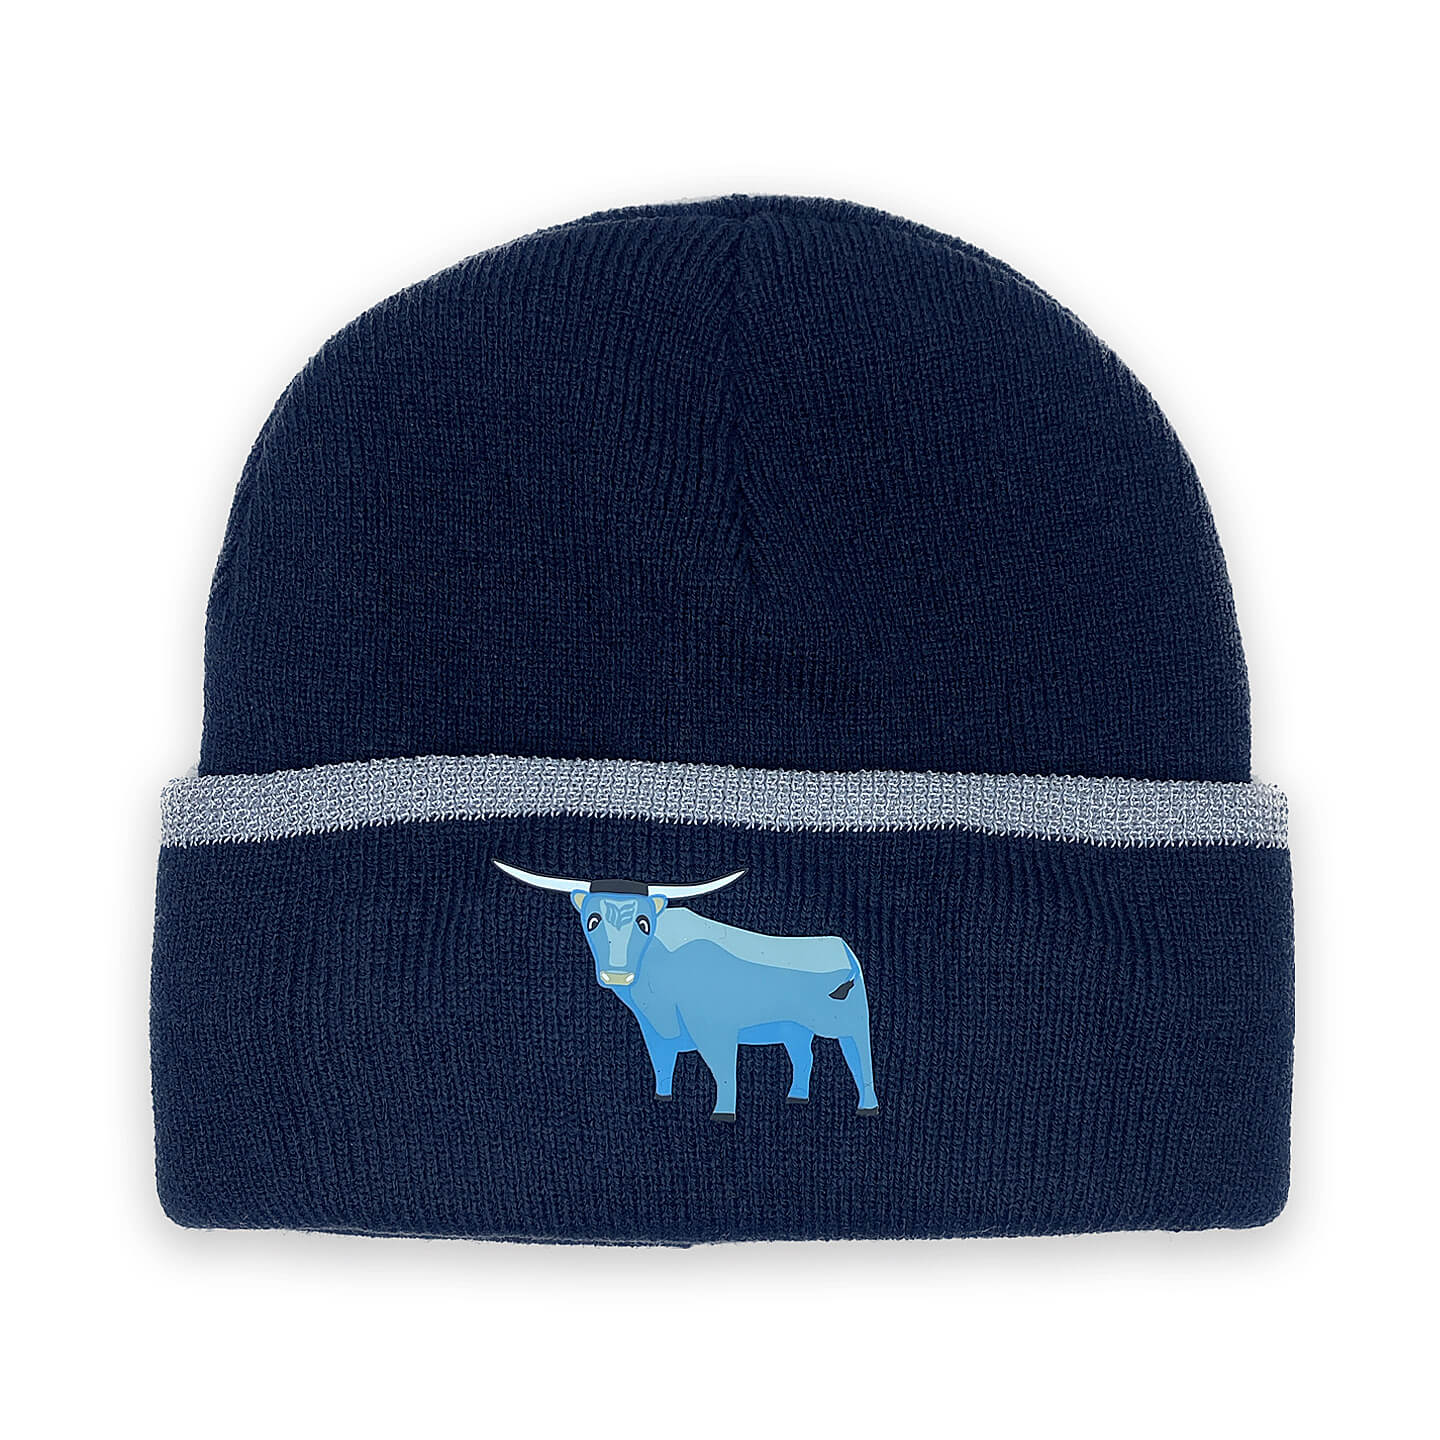 Fleece Lined Cuffed beanie in Blue with Babe the Blue Ox Patch